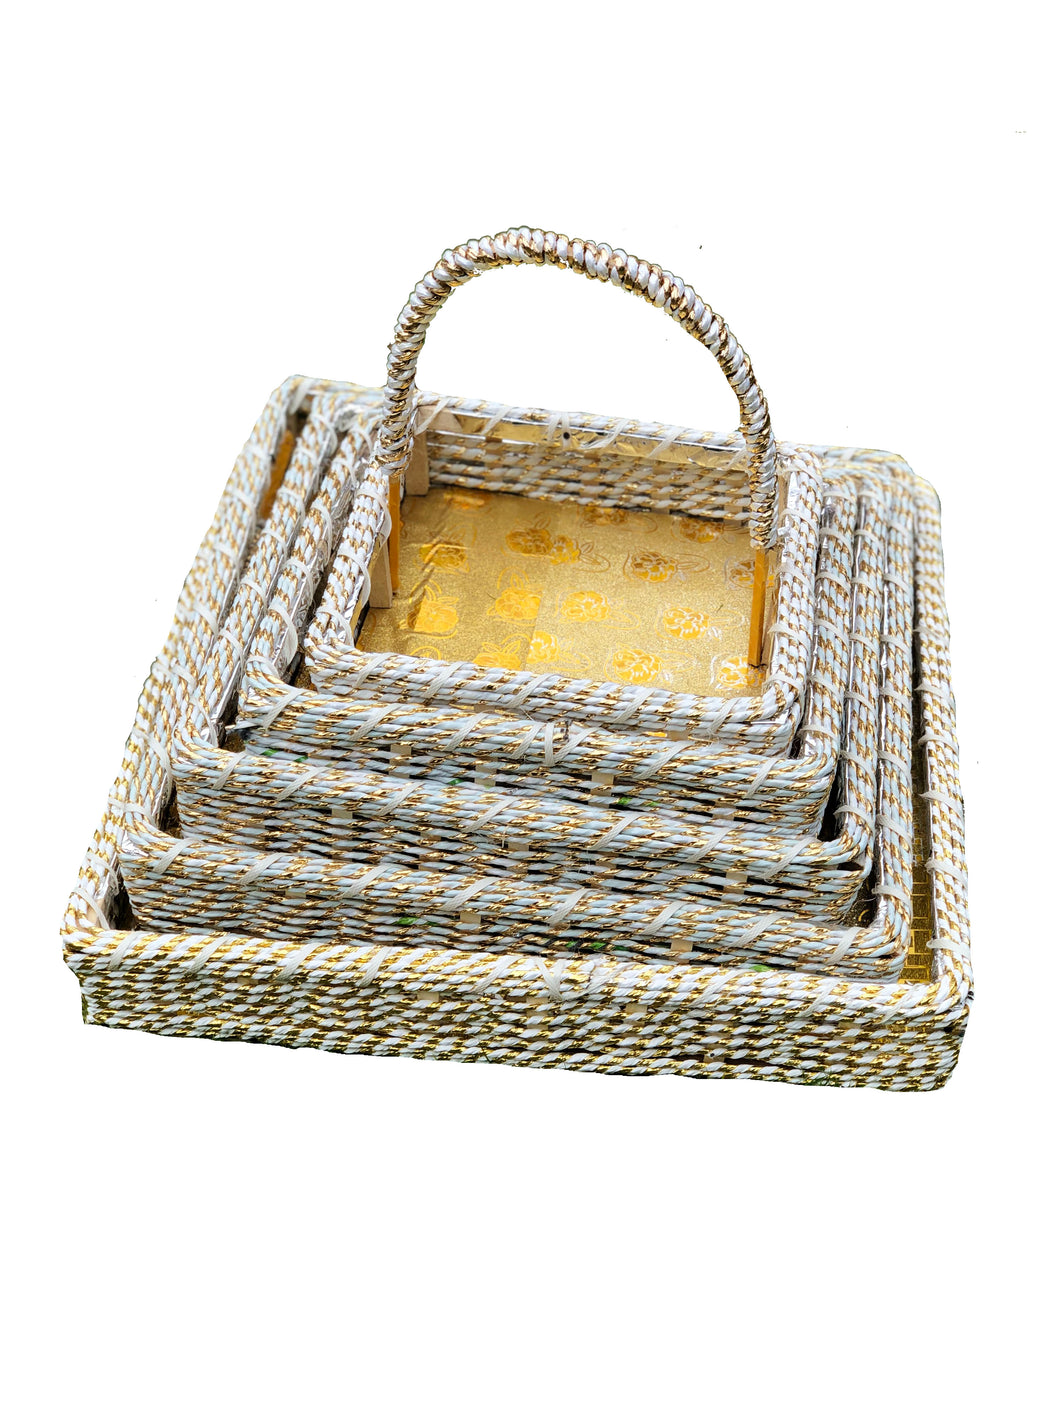 White and Gold 5 Square Hamper Gifting Baskets with option for Handles